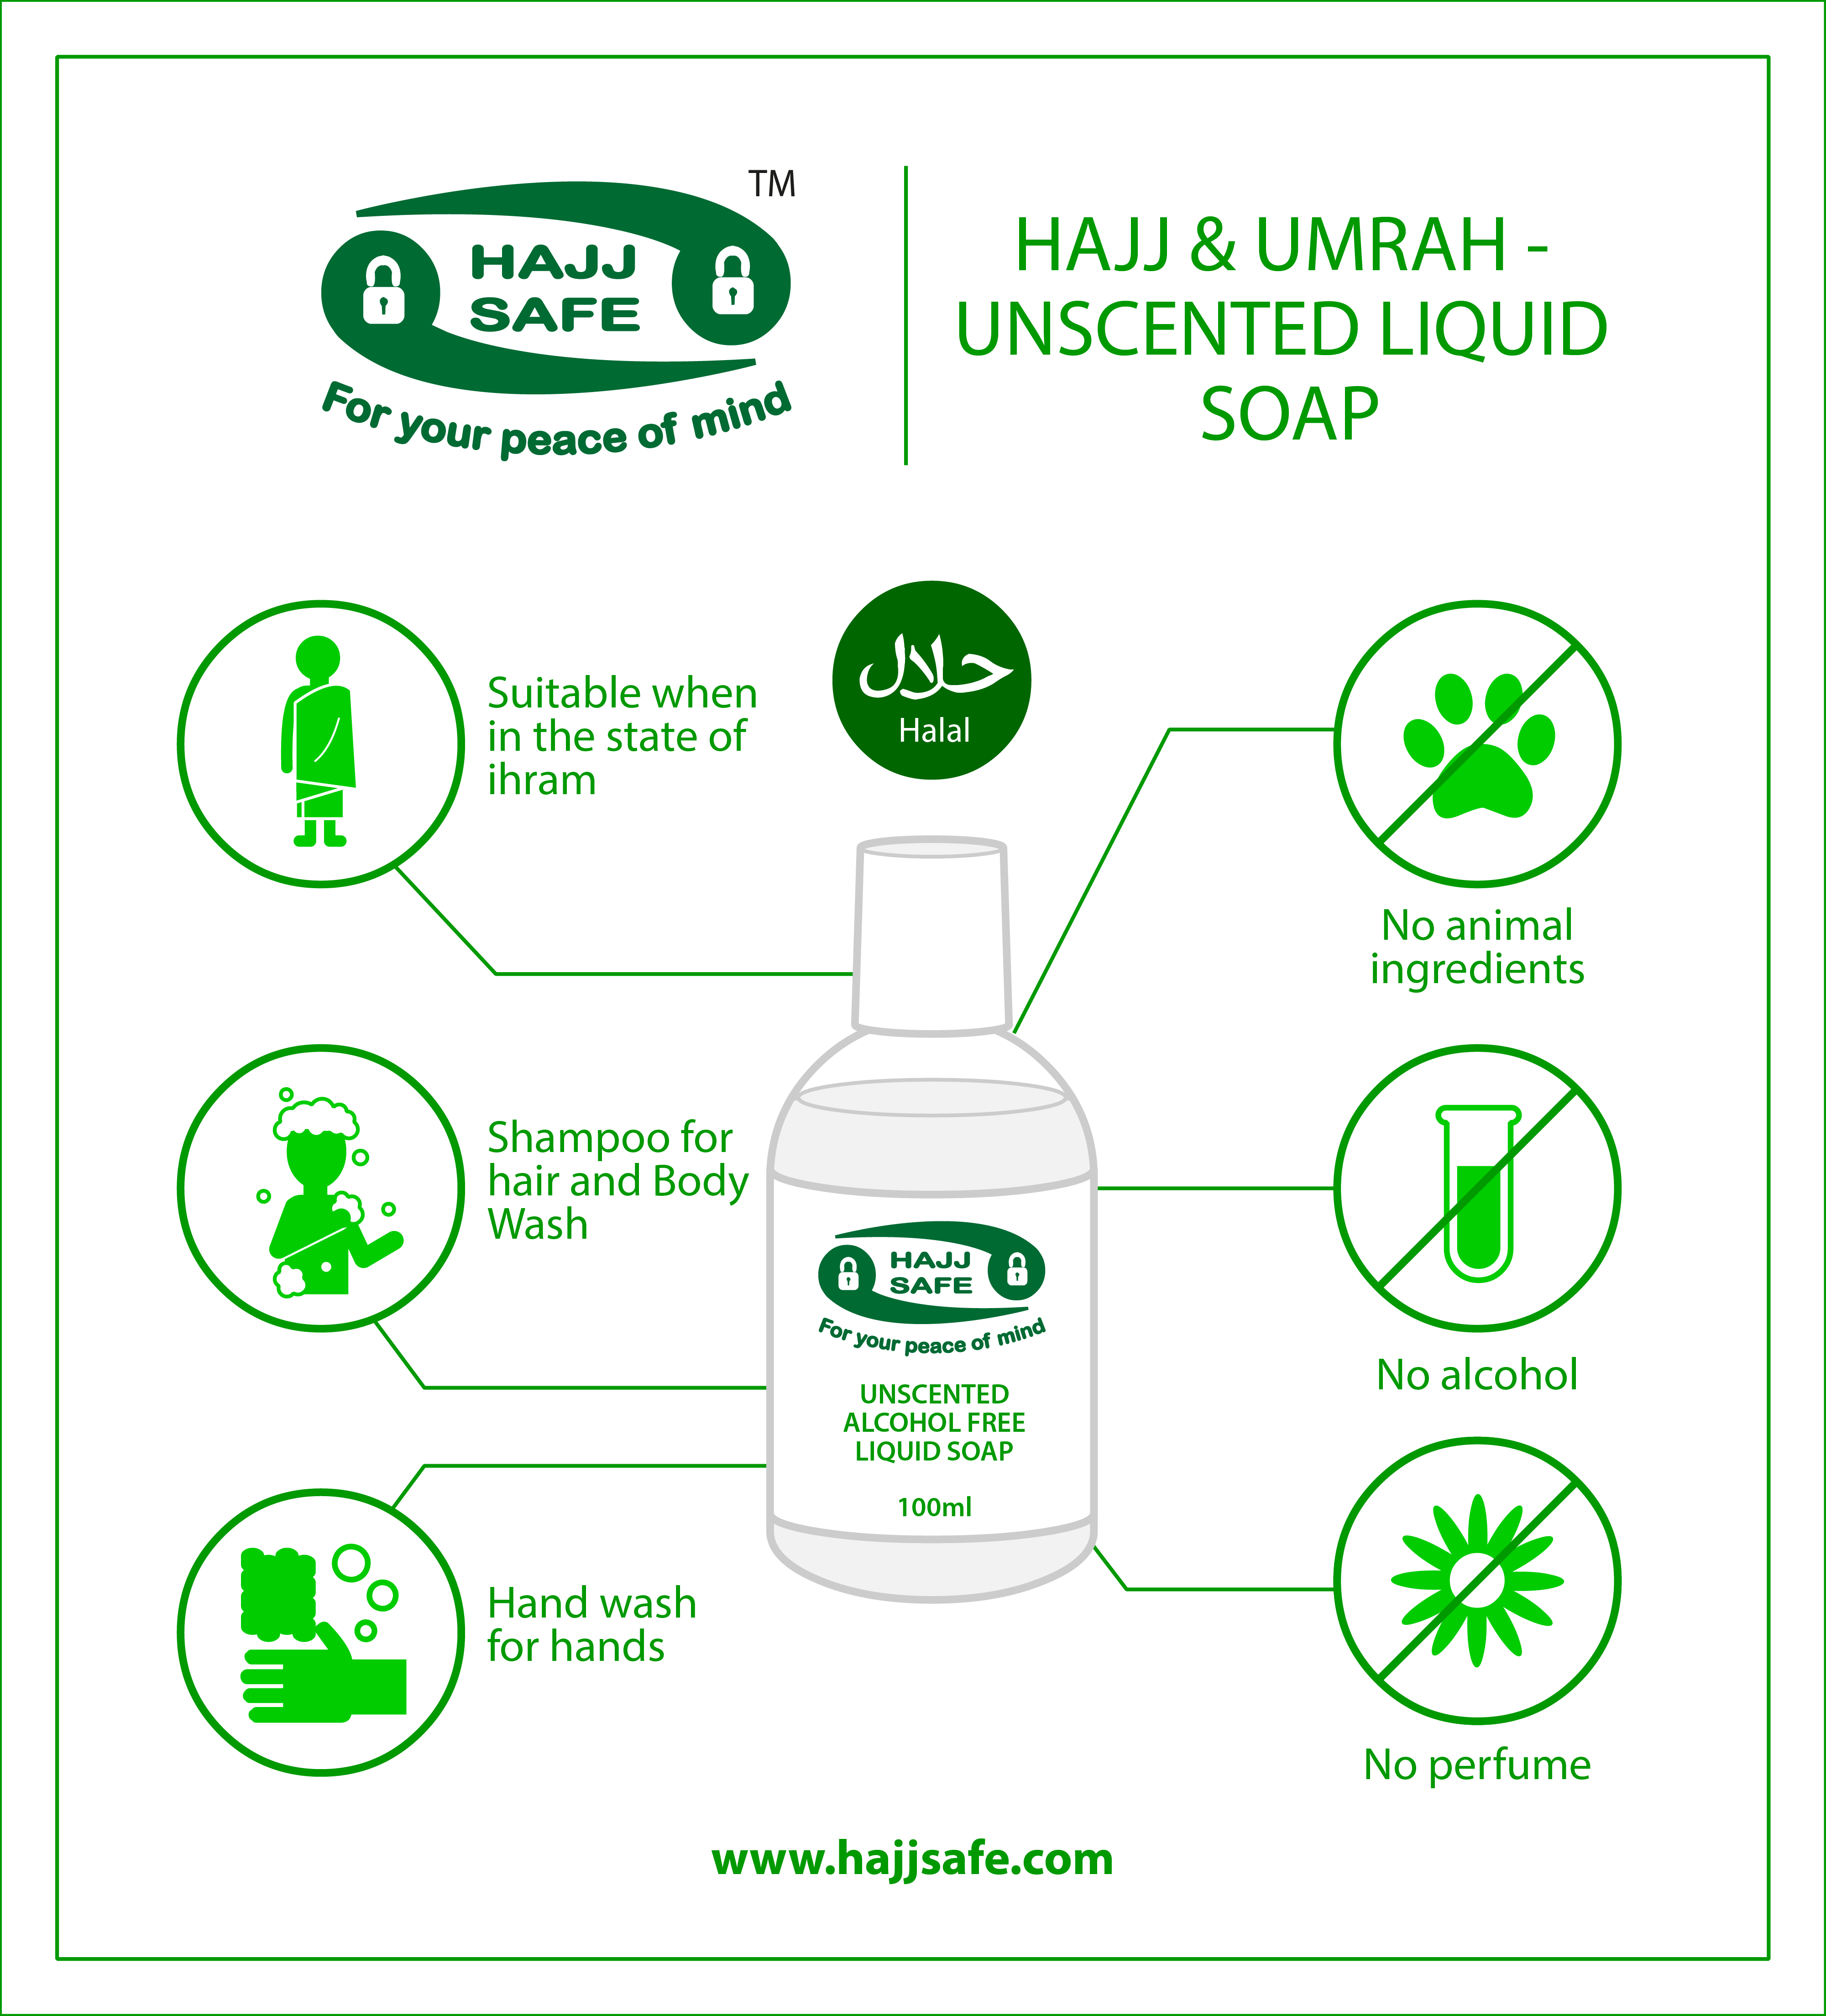 hajj-safe-unscented-soap-body-wash-and-shampoo.png